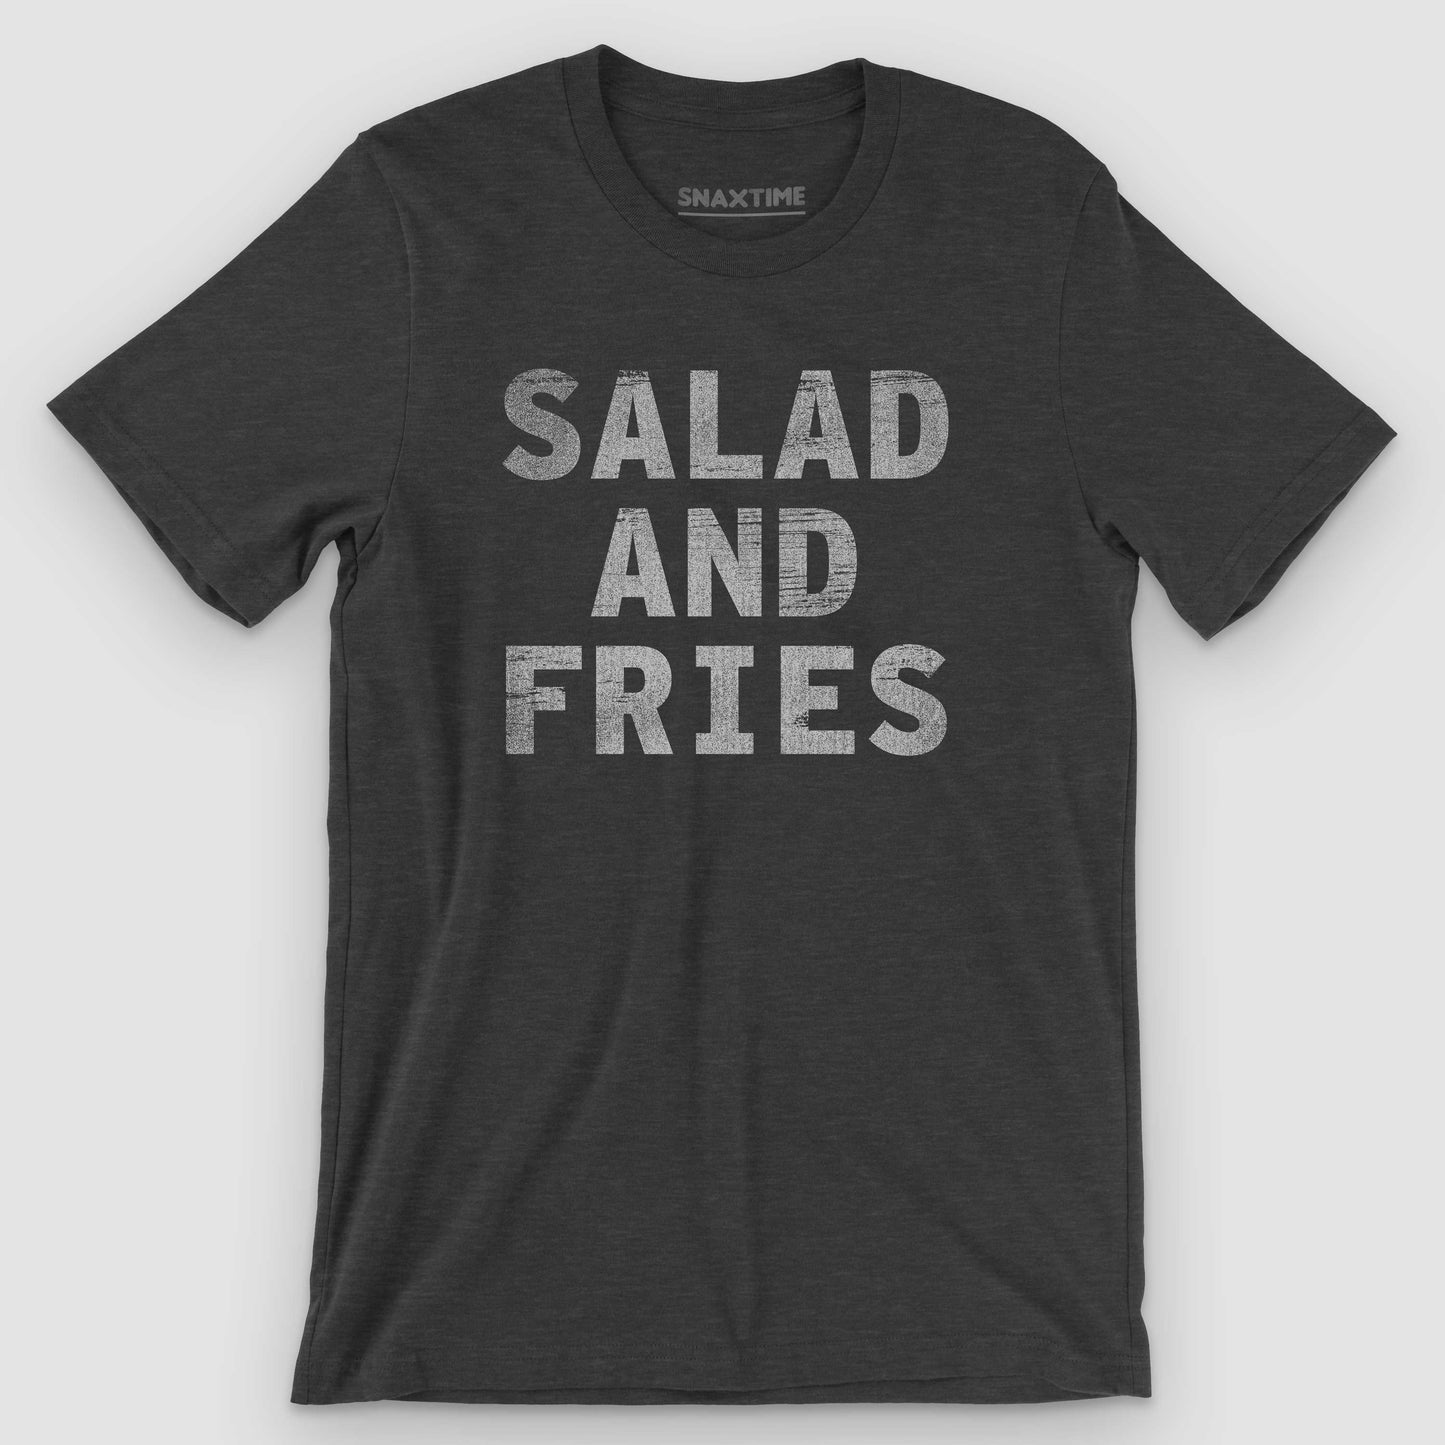 Dark Grey Heather Salad and Fries Graphic T-Shirt by Snaxtime